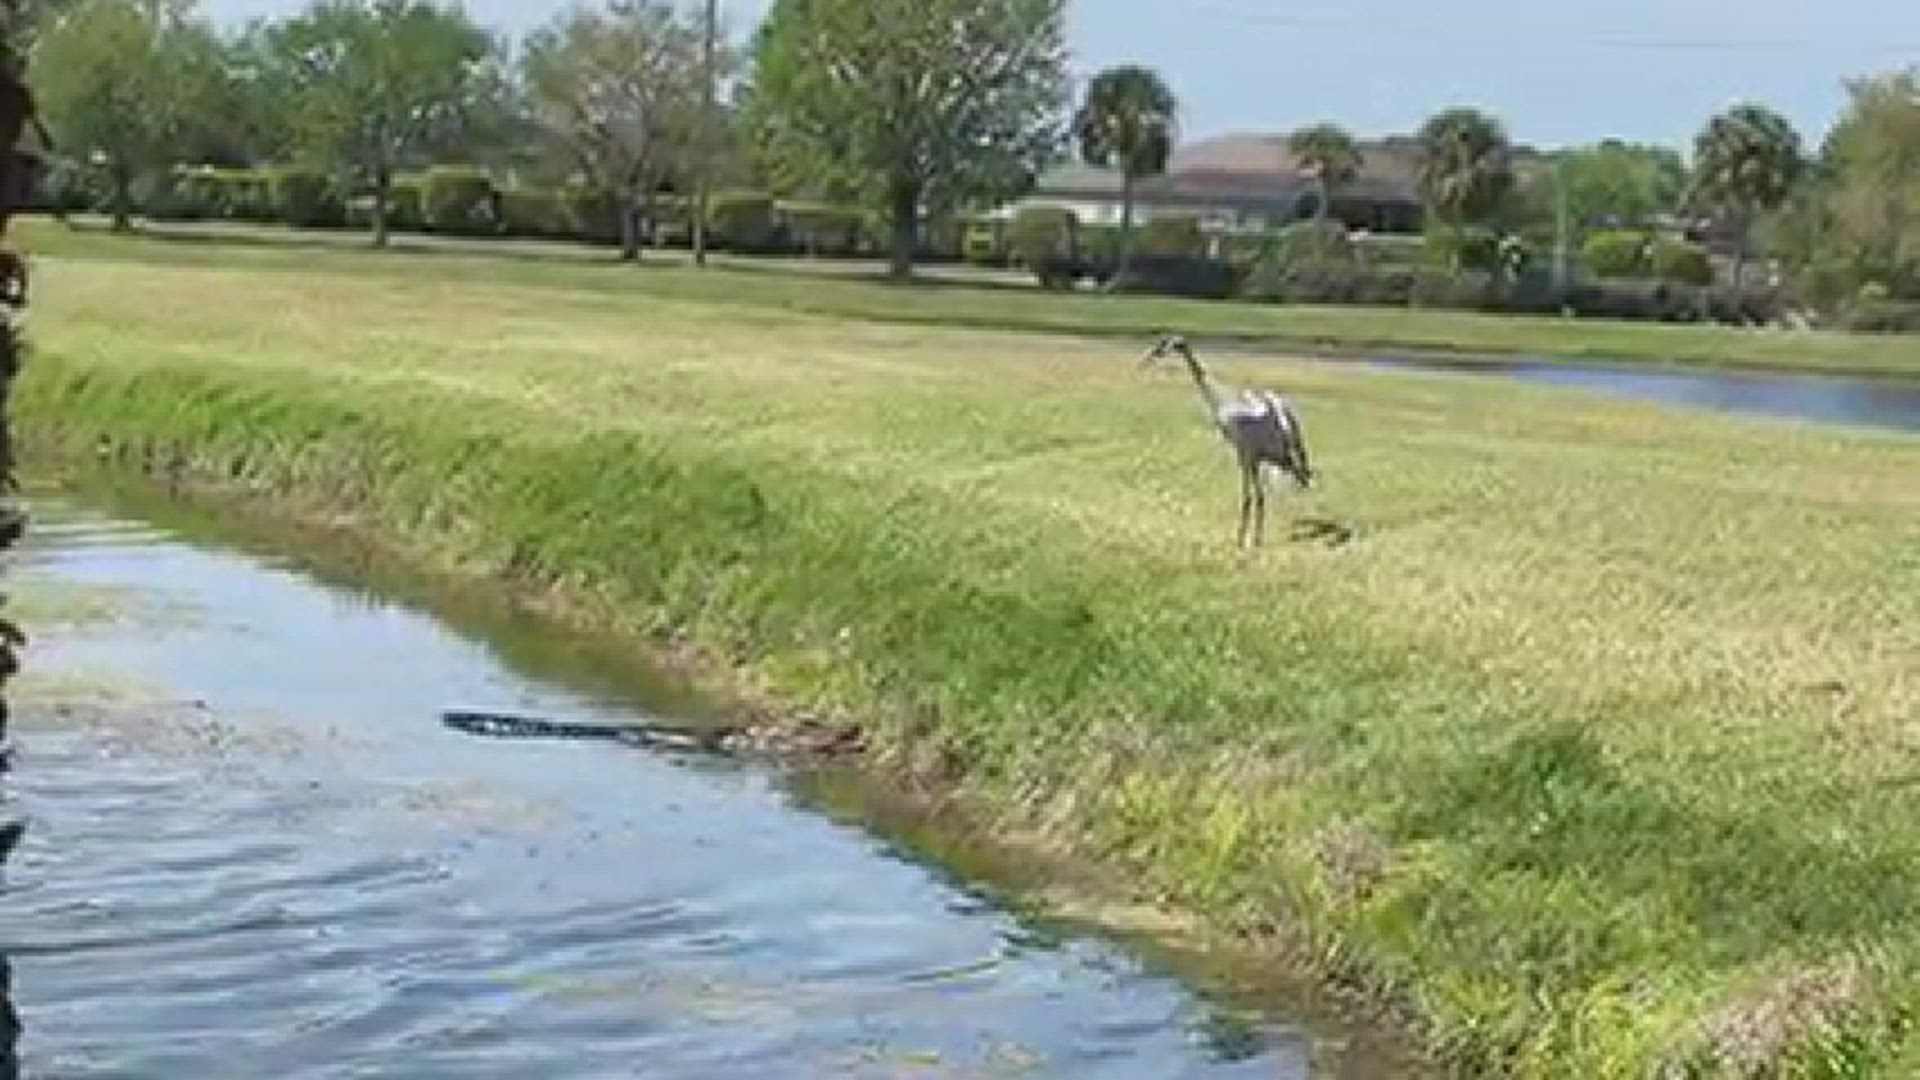 A video taken by Laura Akin of Florida shows a sandhill crane facing off against an alligator.